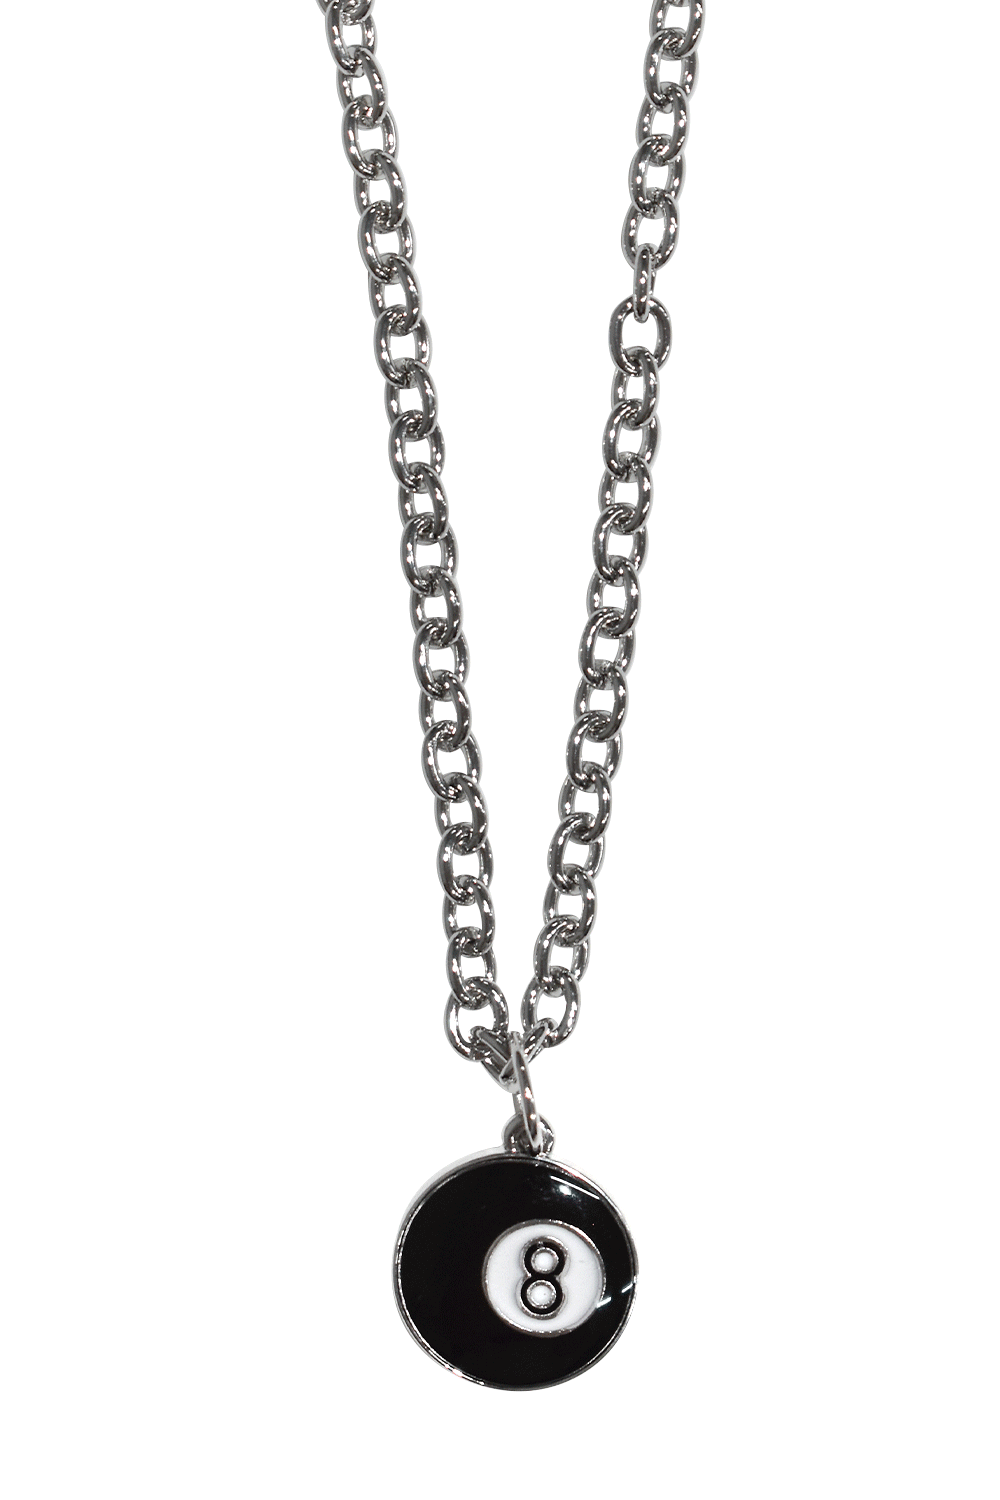 8ball necklace